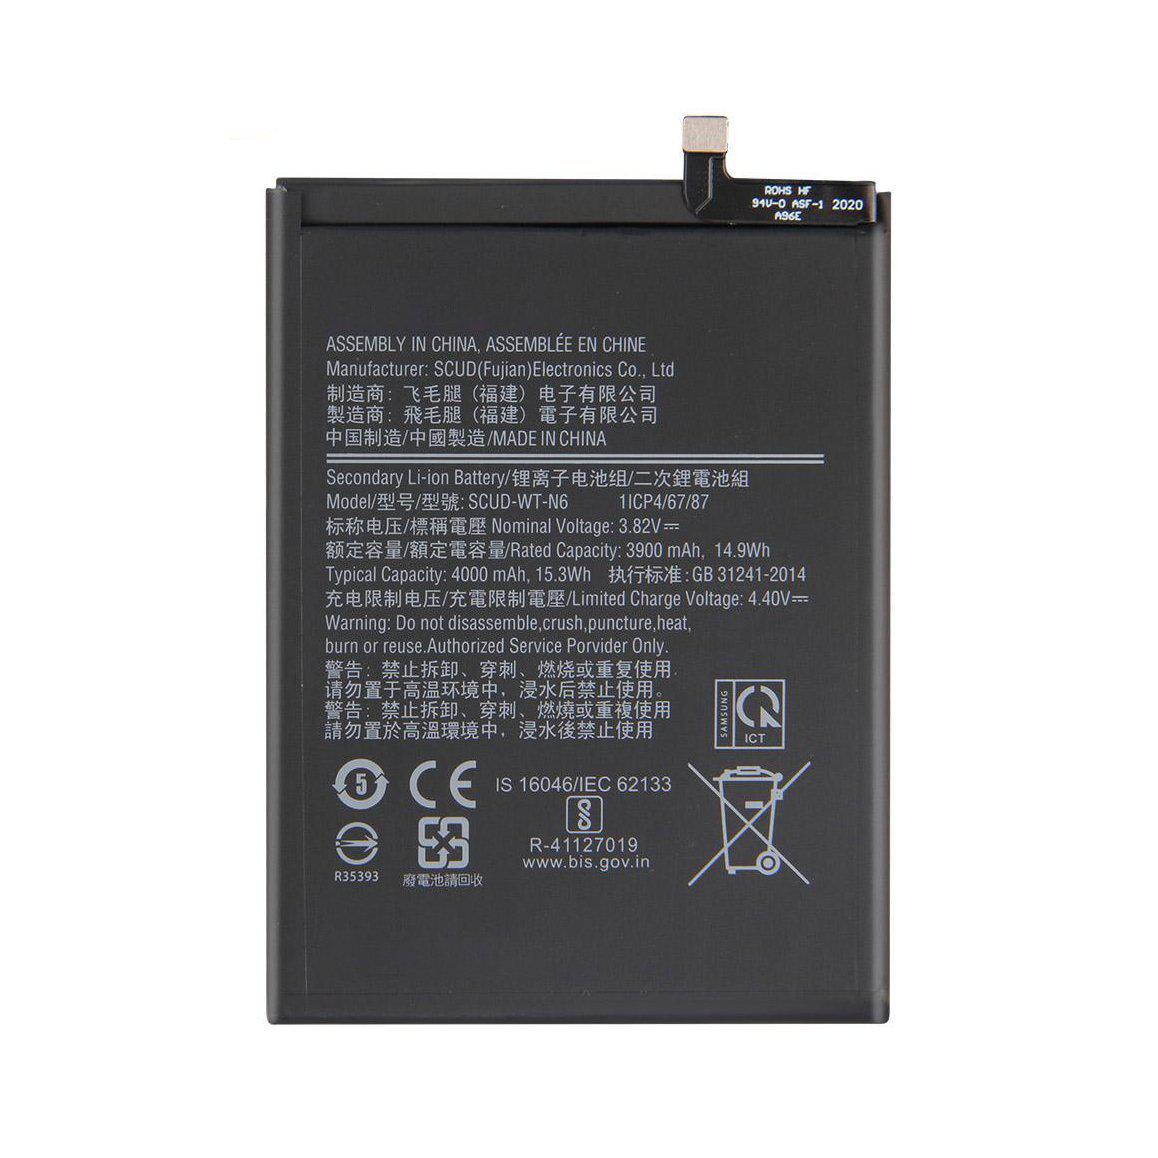 Replacement Battery For Samsung Galaxy A10s / A20s | SCUD-WT-N6-Mobile Phone Parts-First Help Tech